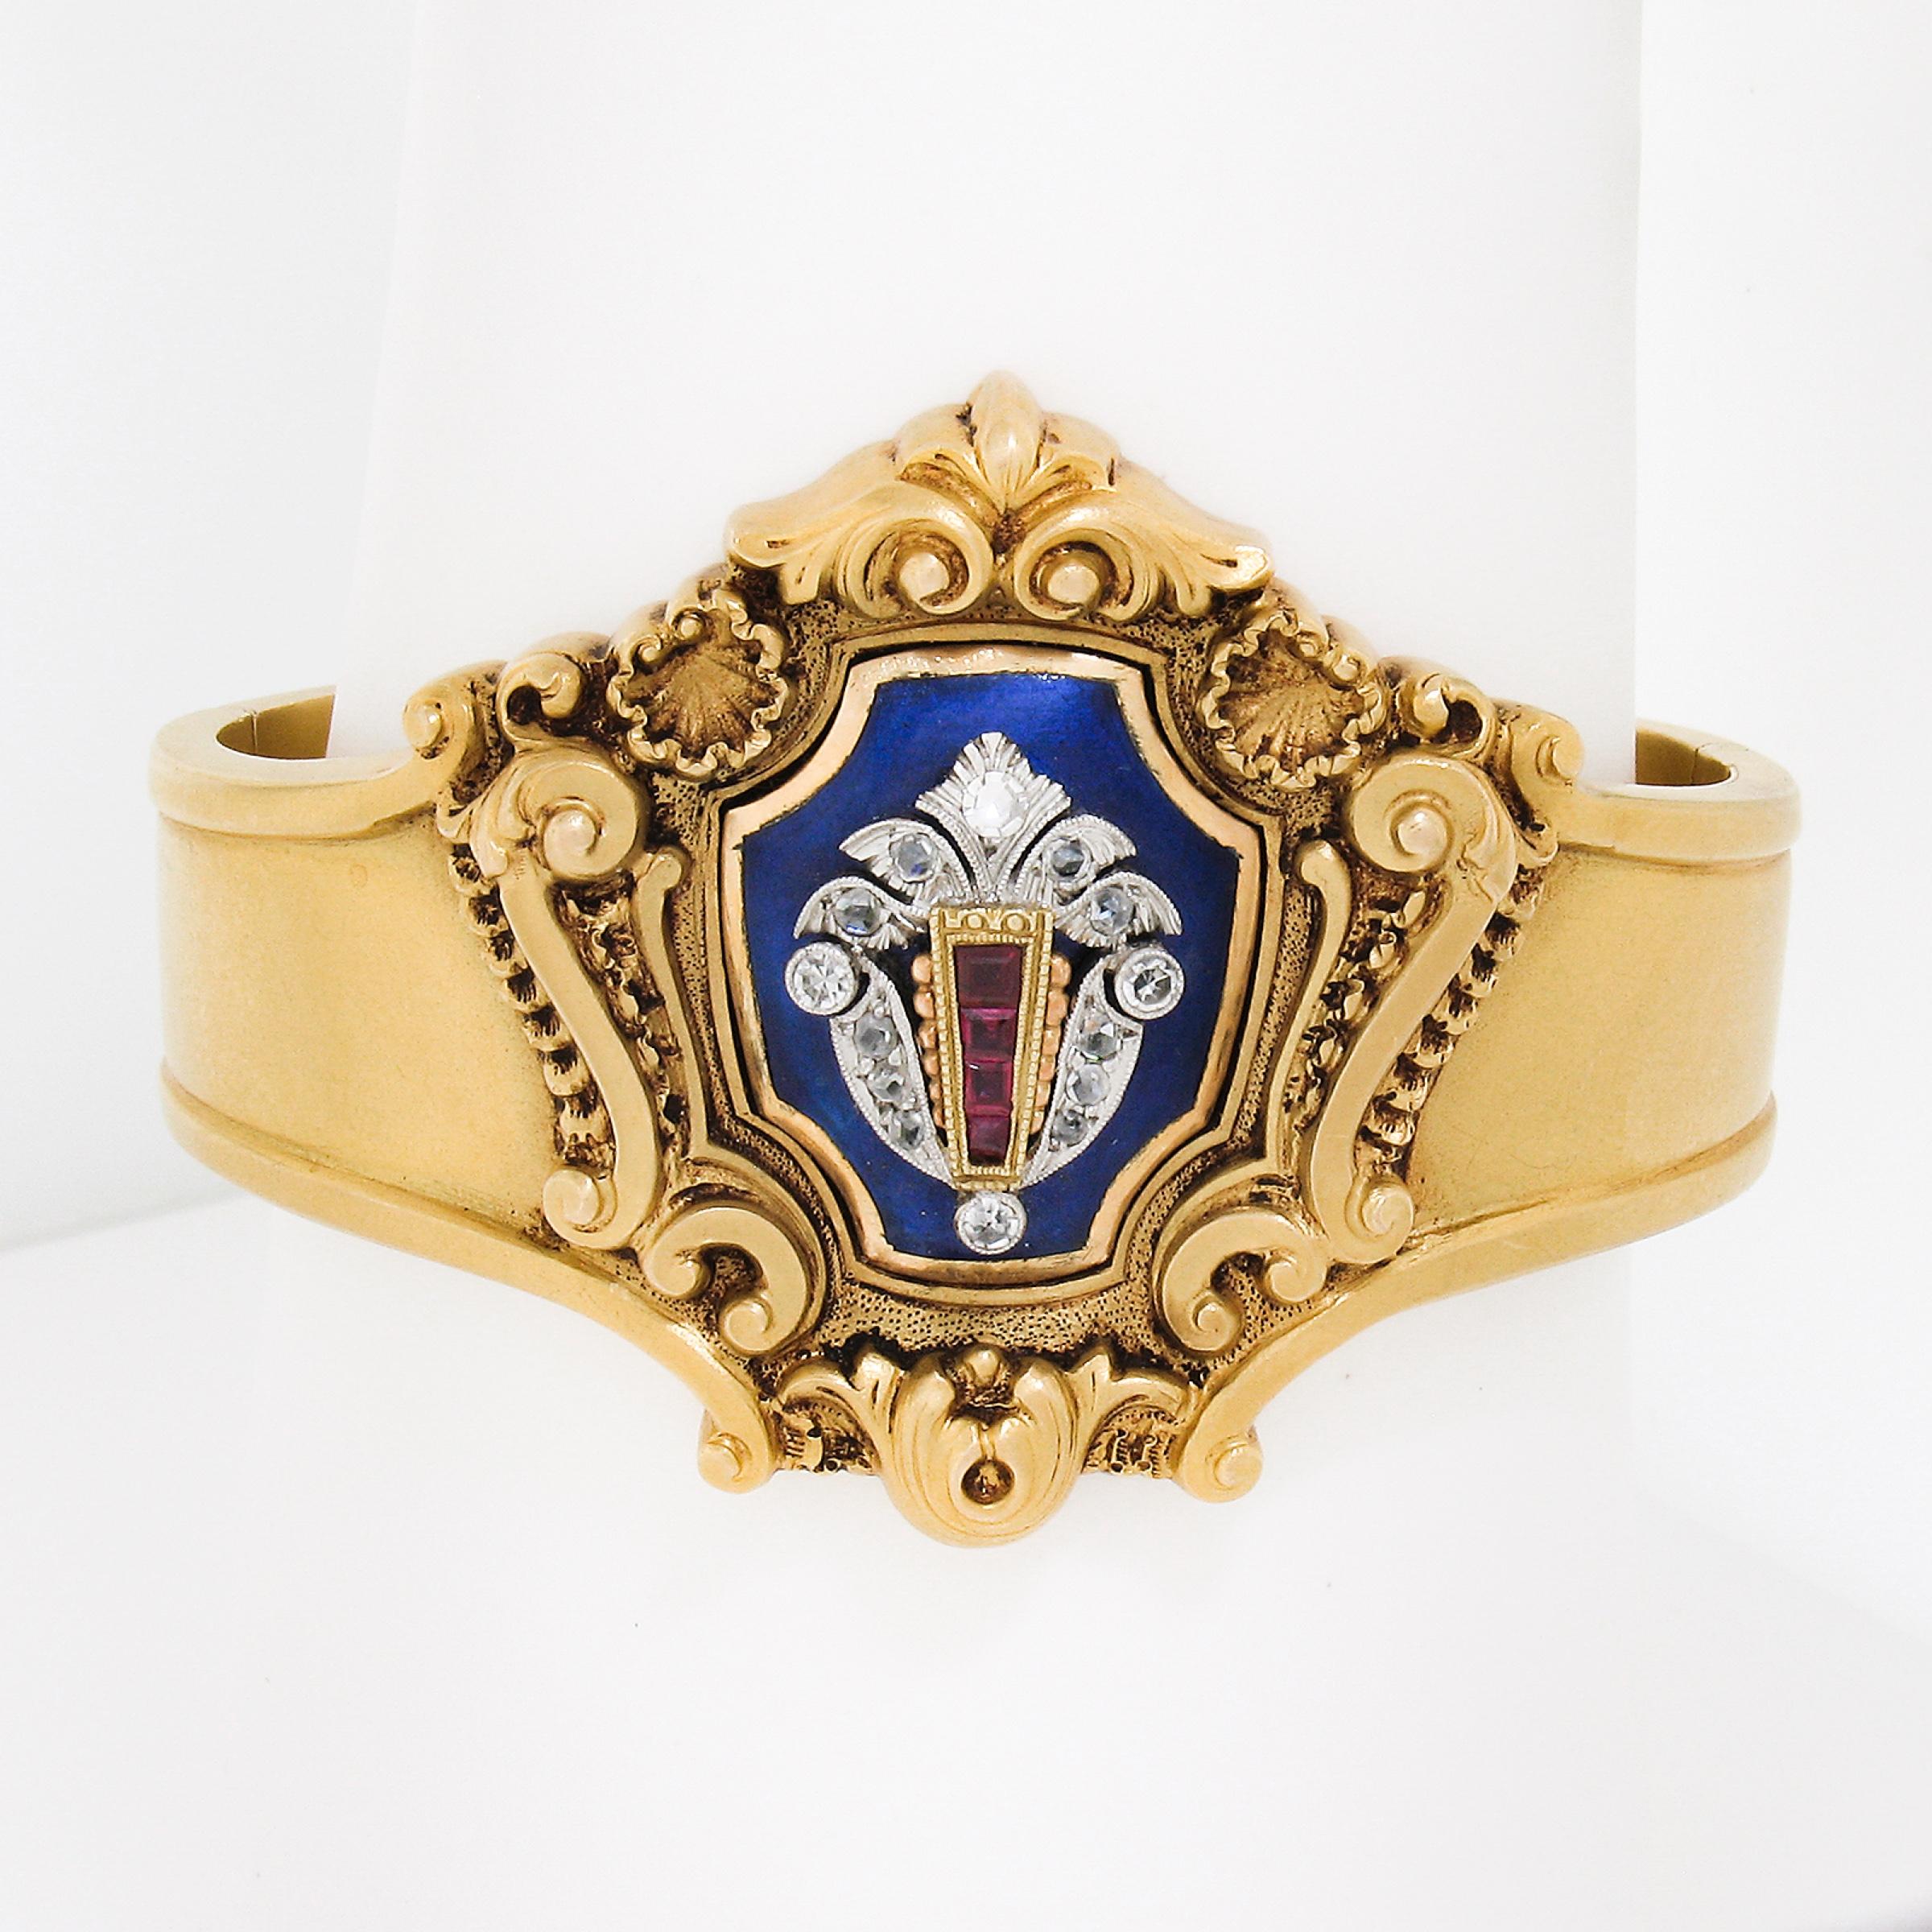 This jaw dropping antique bangle bracelet is crafted in solid 18k yellow gold in the early Victorian period. The incredible design features a dramatic center piece that is decorated with floral and scroll repousse work, and is adorned with royal